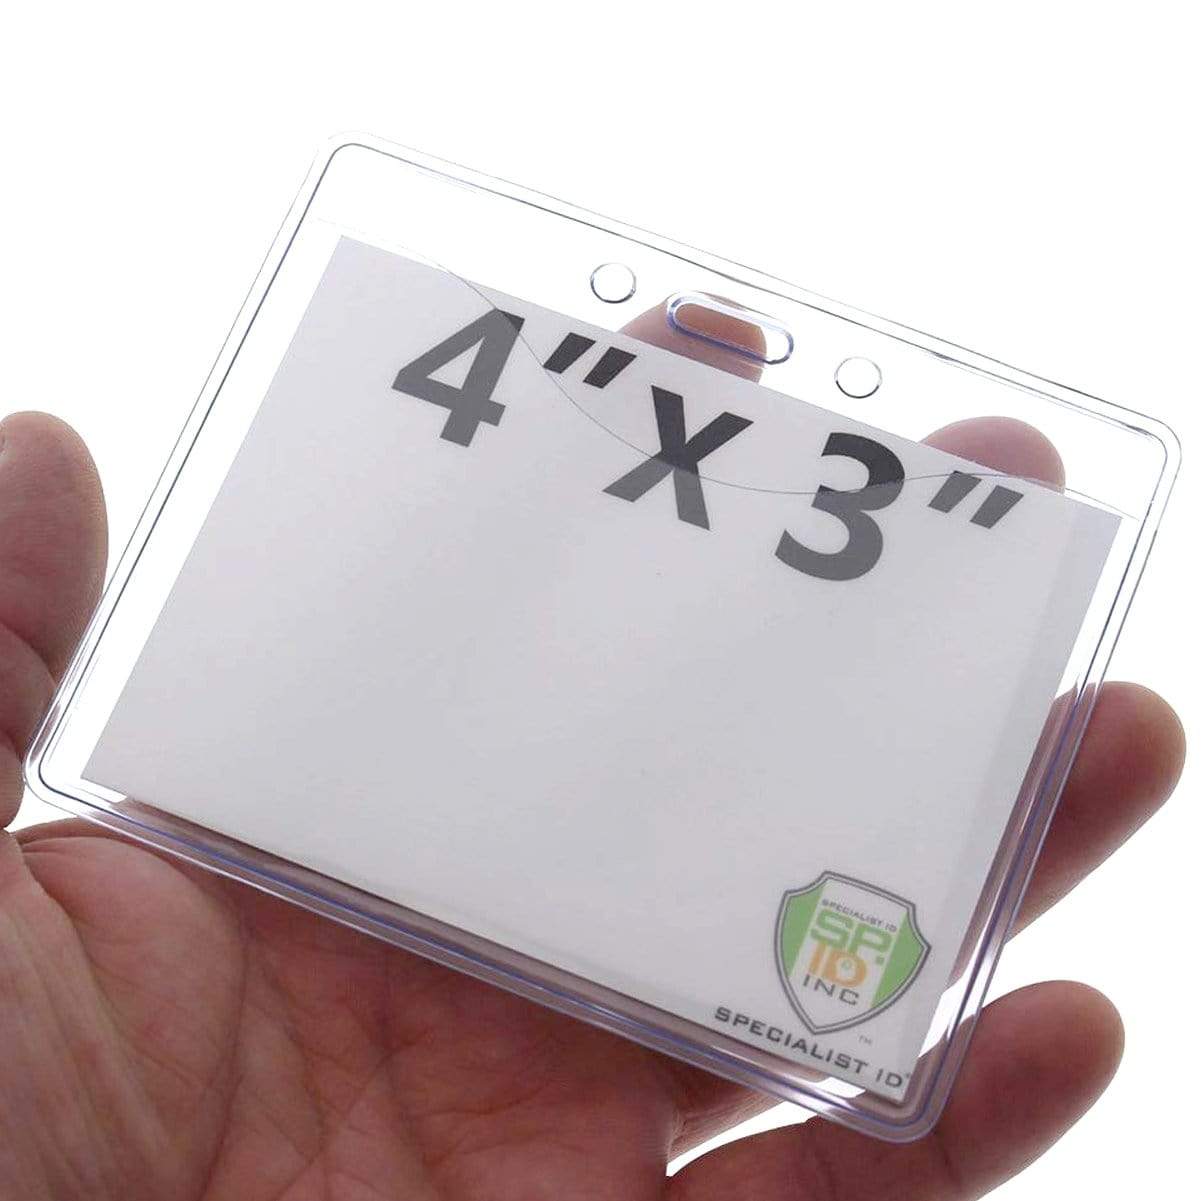 Specialist ID 2 Pack - Premium Event Badge Holder 4x3 with India